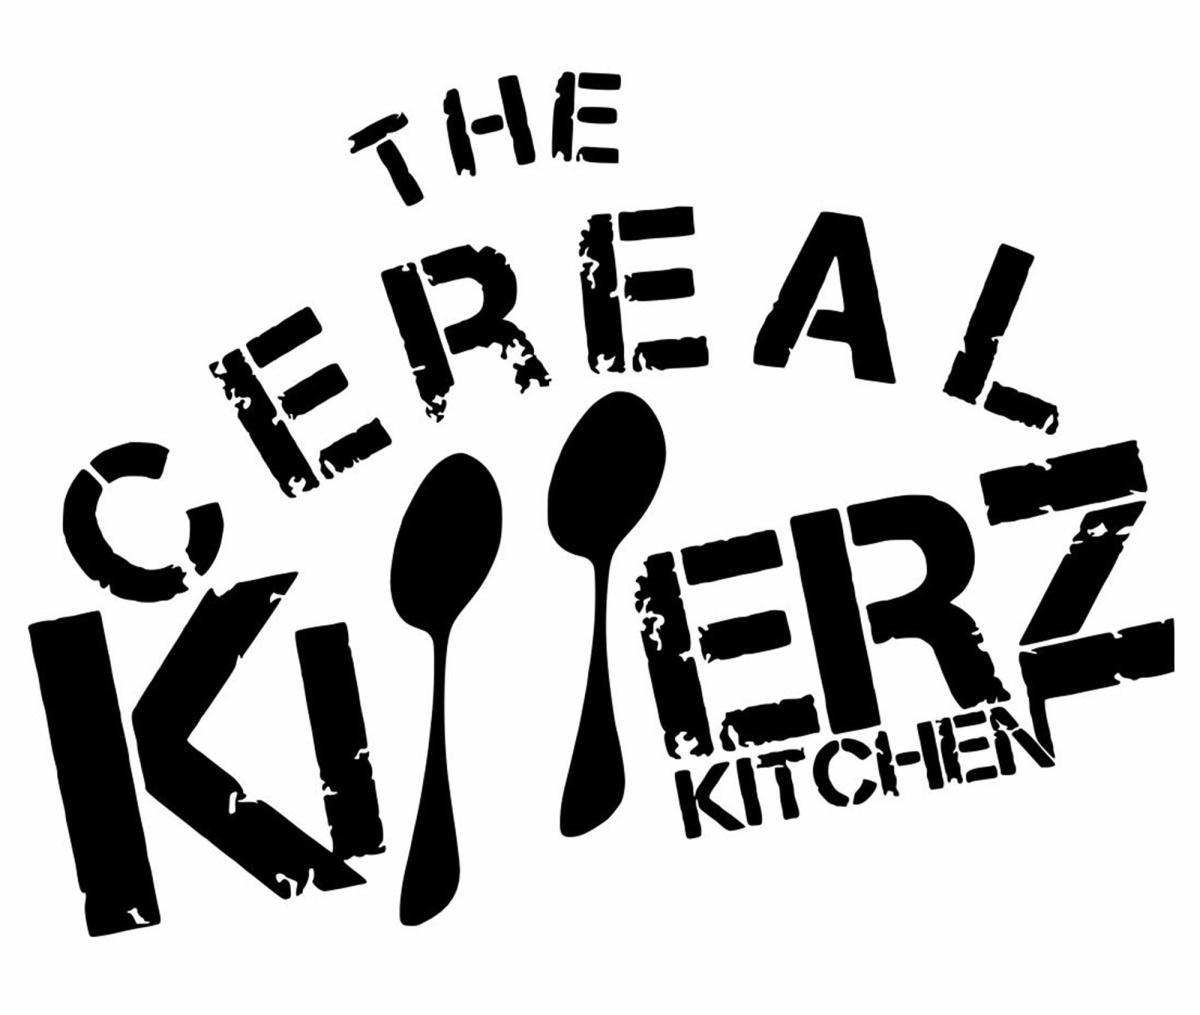 The Cereal Killerz Kitchen @ Oso Blanca Rd. 